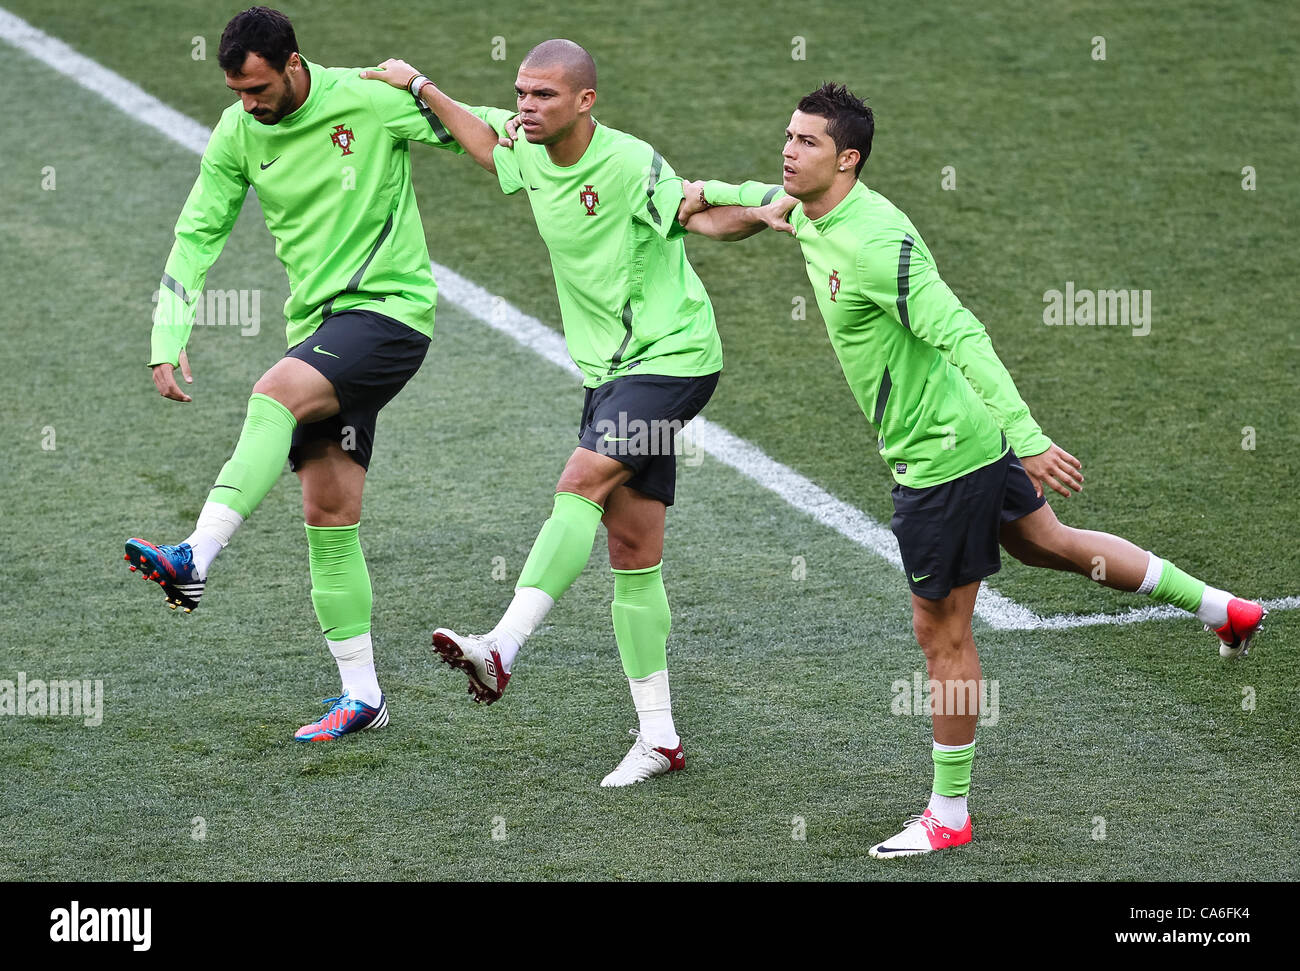 16.06.2012.  UKRAINE, Kharkiv Portugal´s players Cristiano Ronaldo (R), Pepe (C) and  Hugo Almeida  takes part in a training session at the Metalist Stadium in Kharkiv on June 16, 2012 during the Euro 2012 football championships. Stock Photo